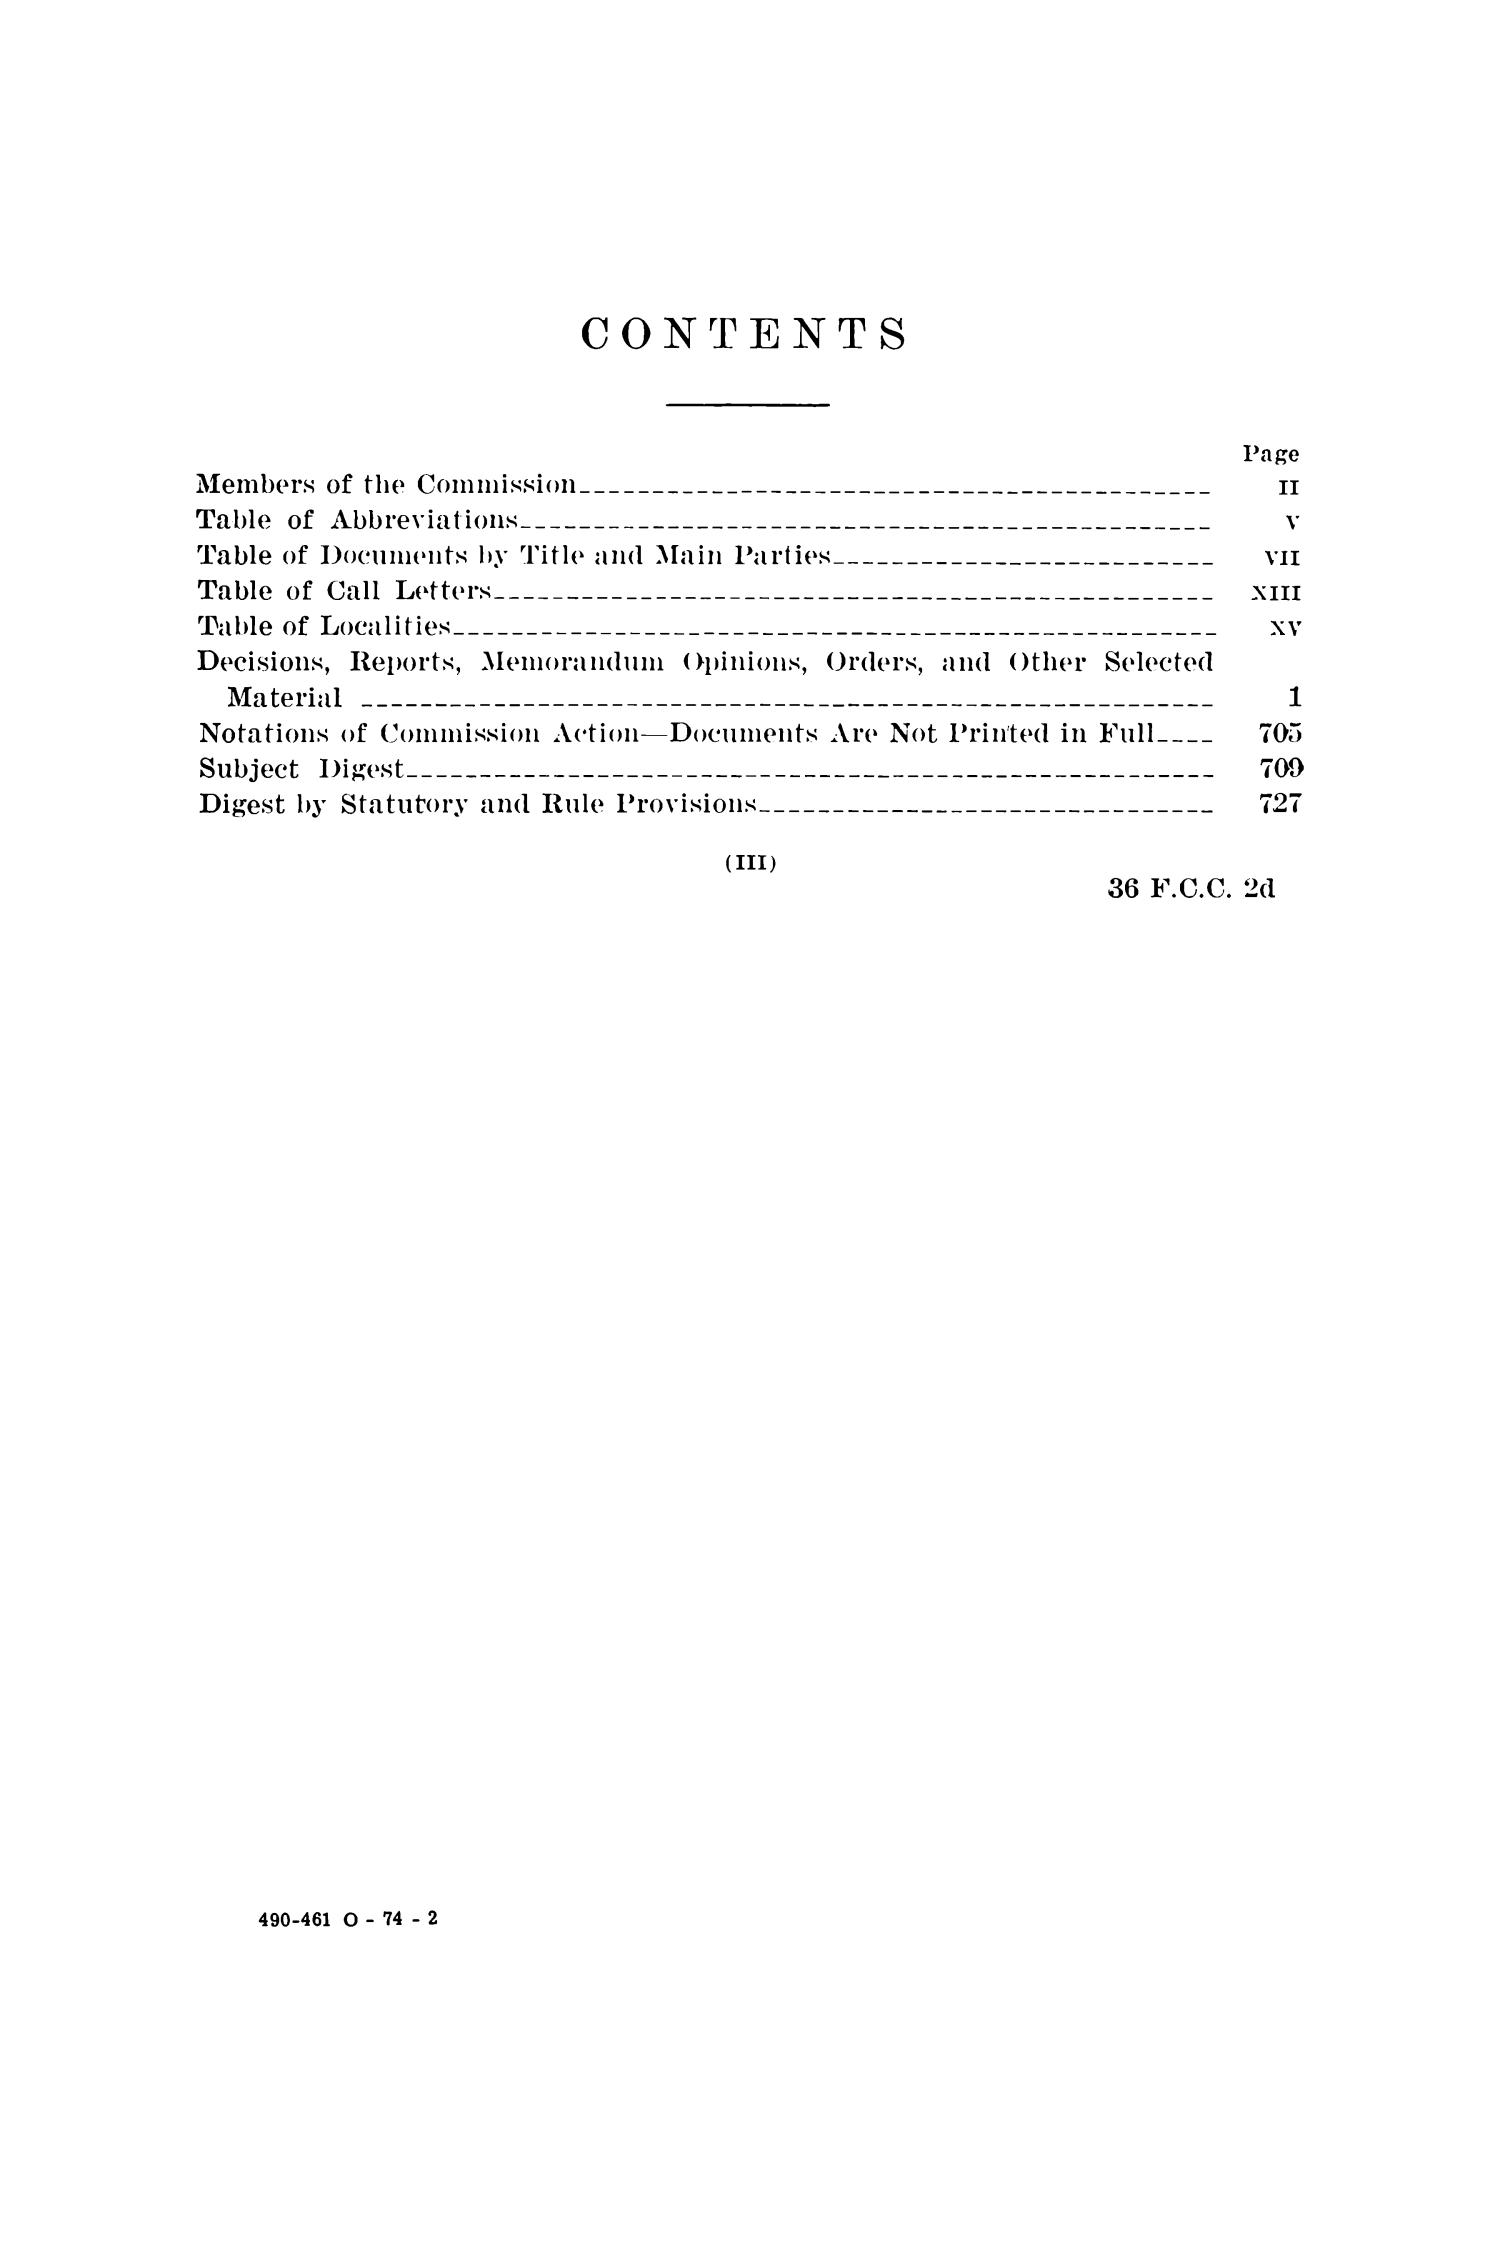 FCC Reports, Second Series, Volume 36, August 11, 1972 to September 8, 1972
                                                
                                                    III
                                                